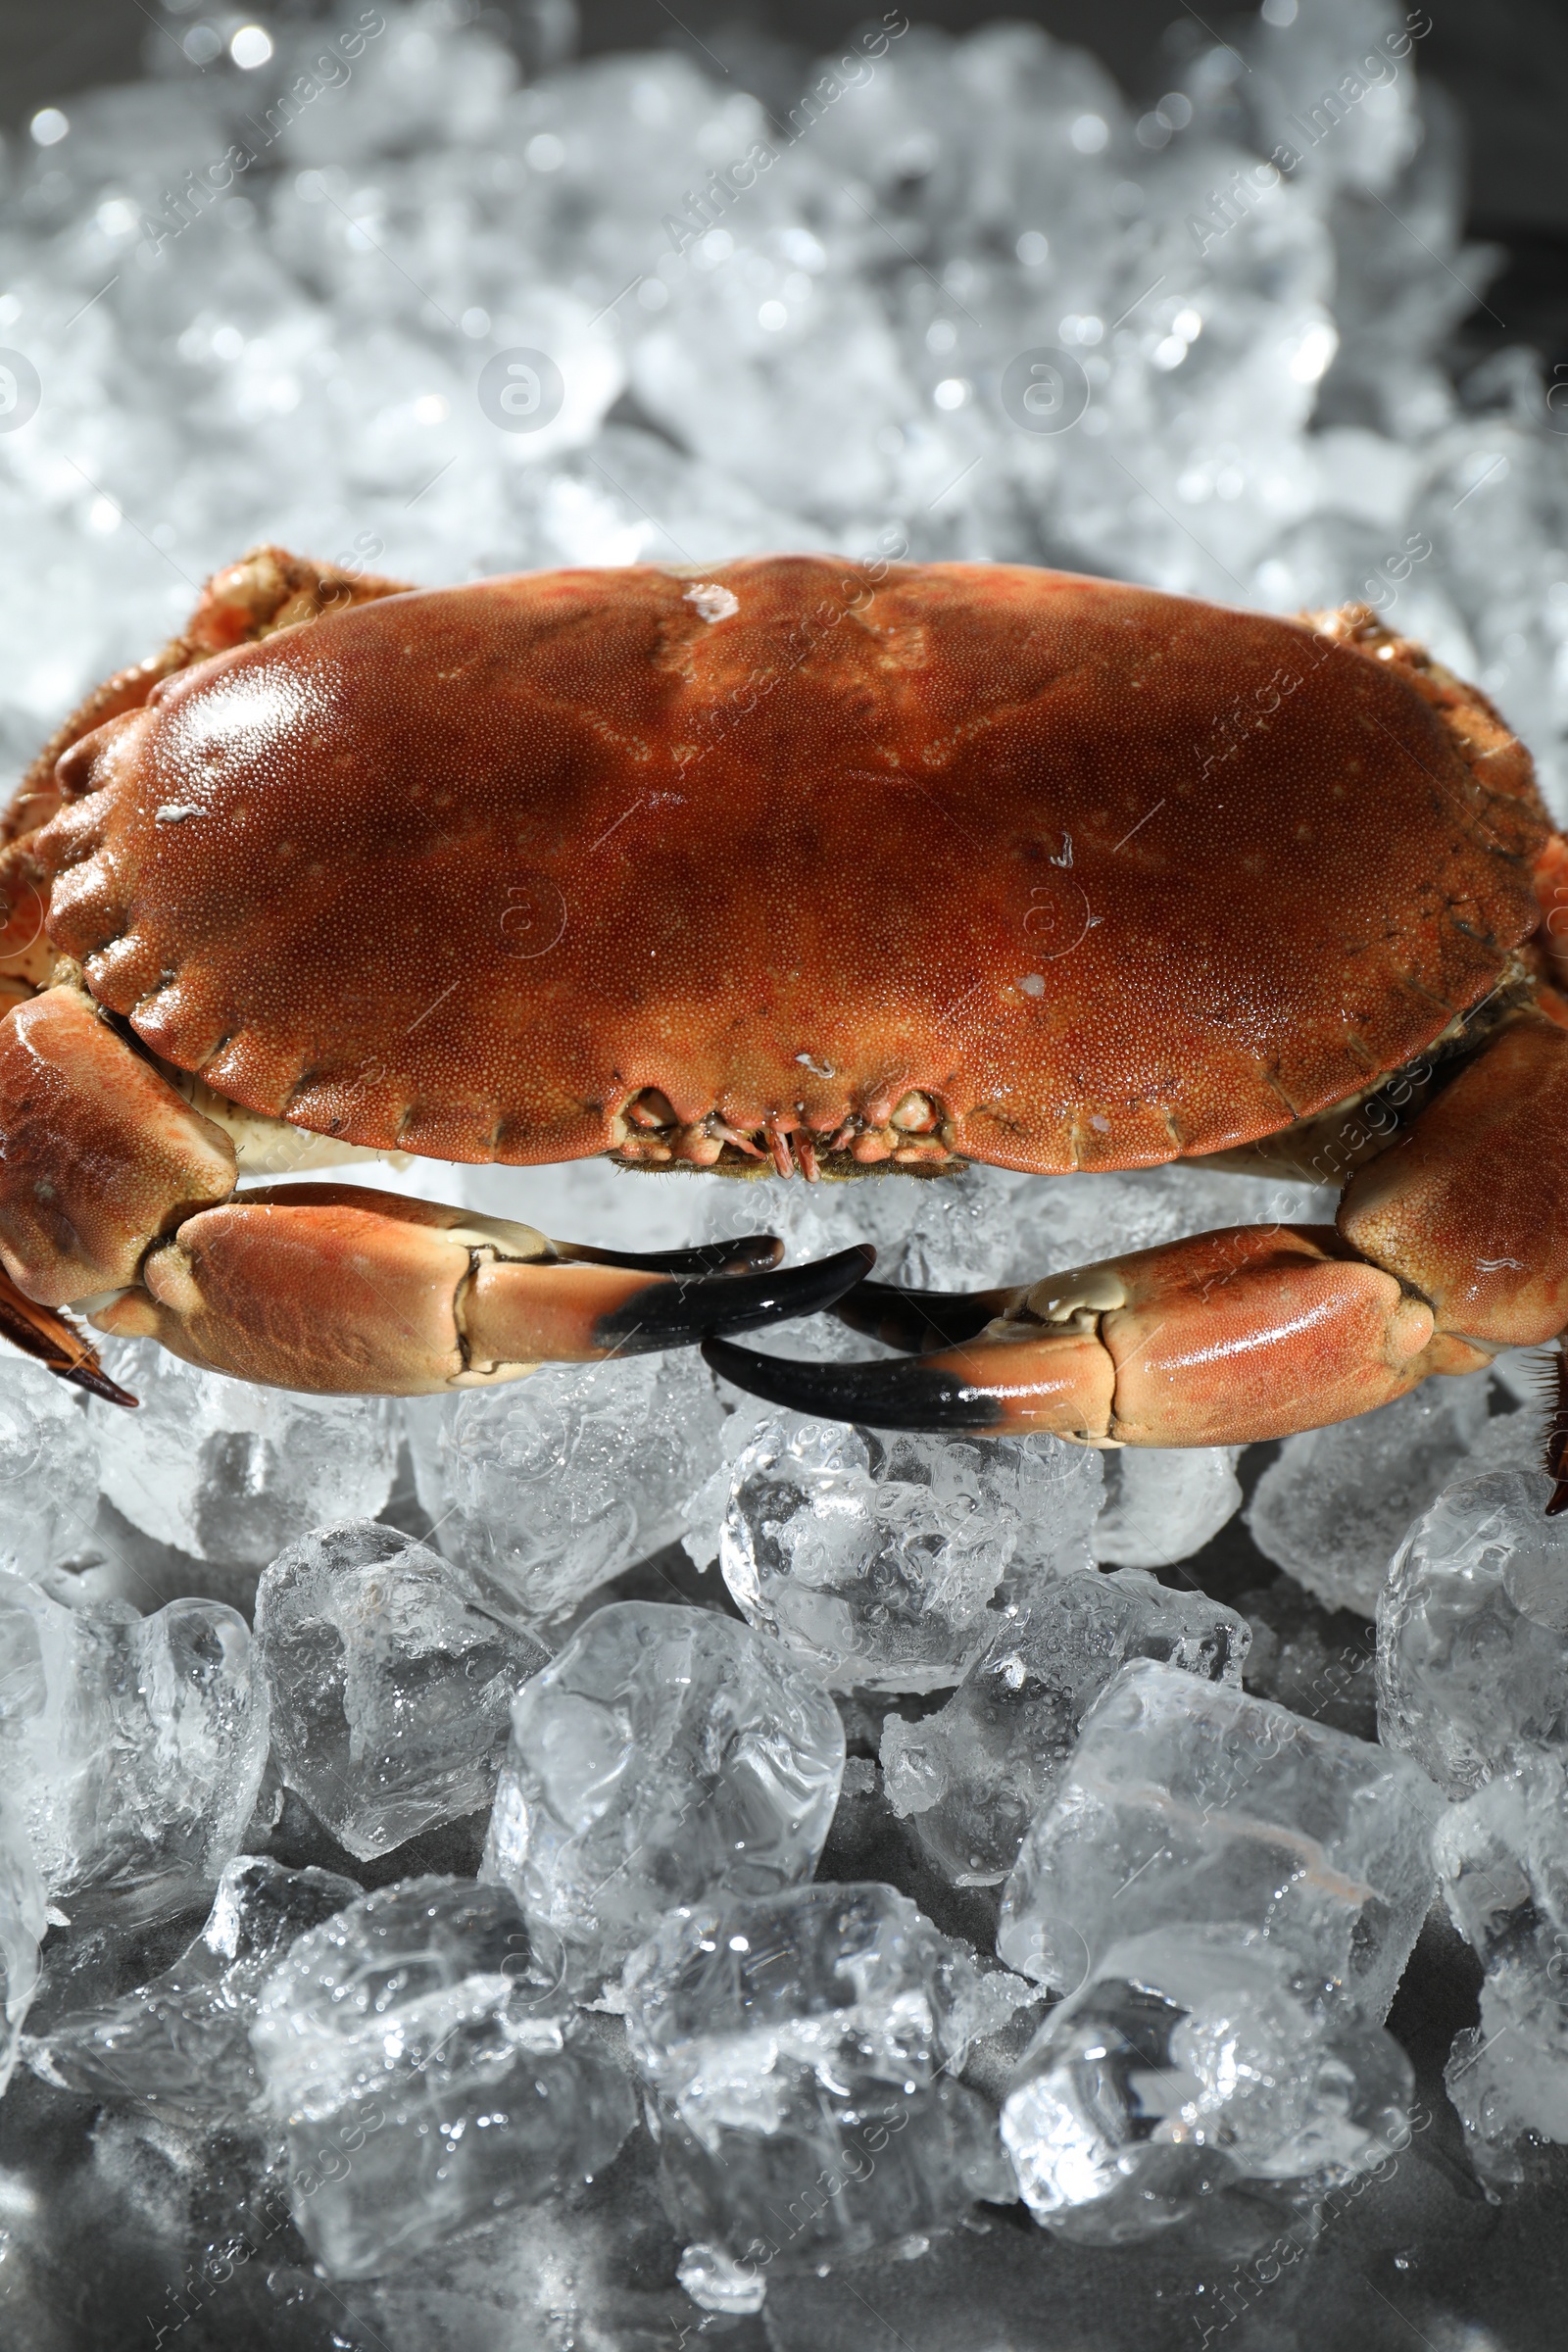 Photo of Delicious boiled crab on ice cubes, closeup